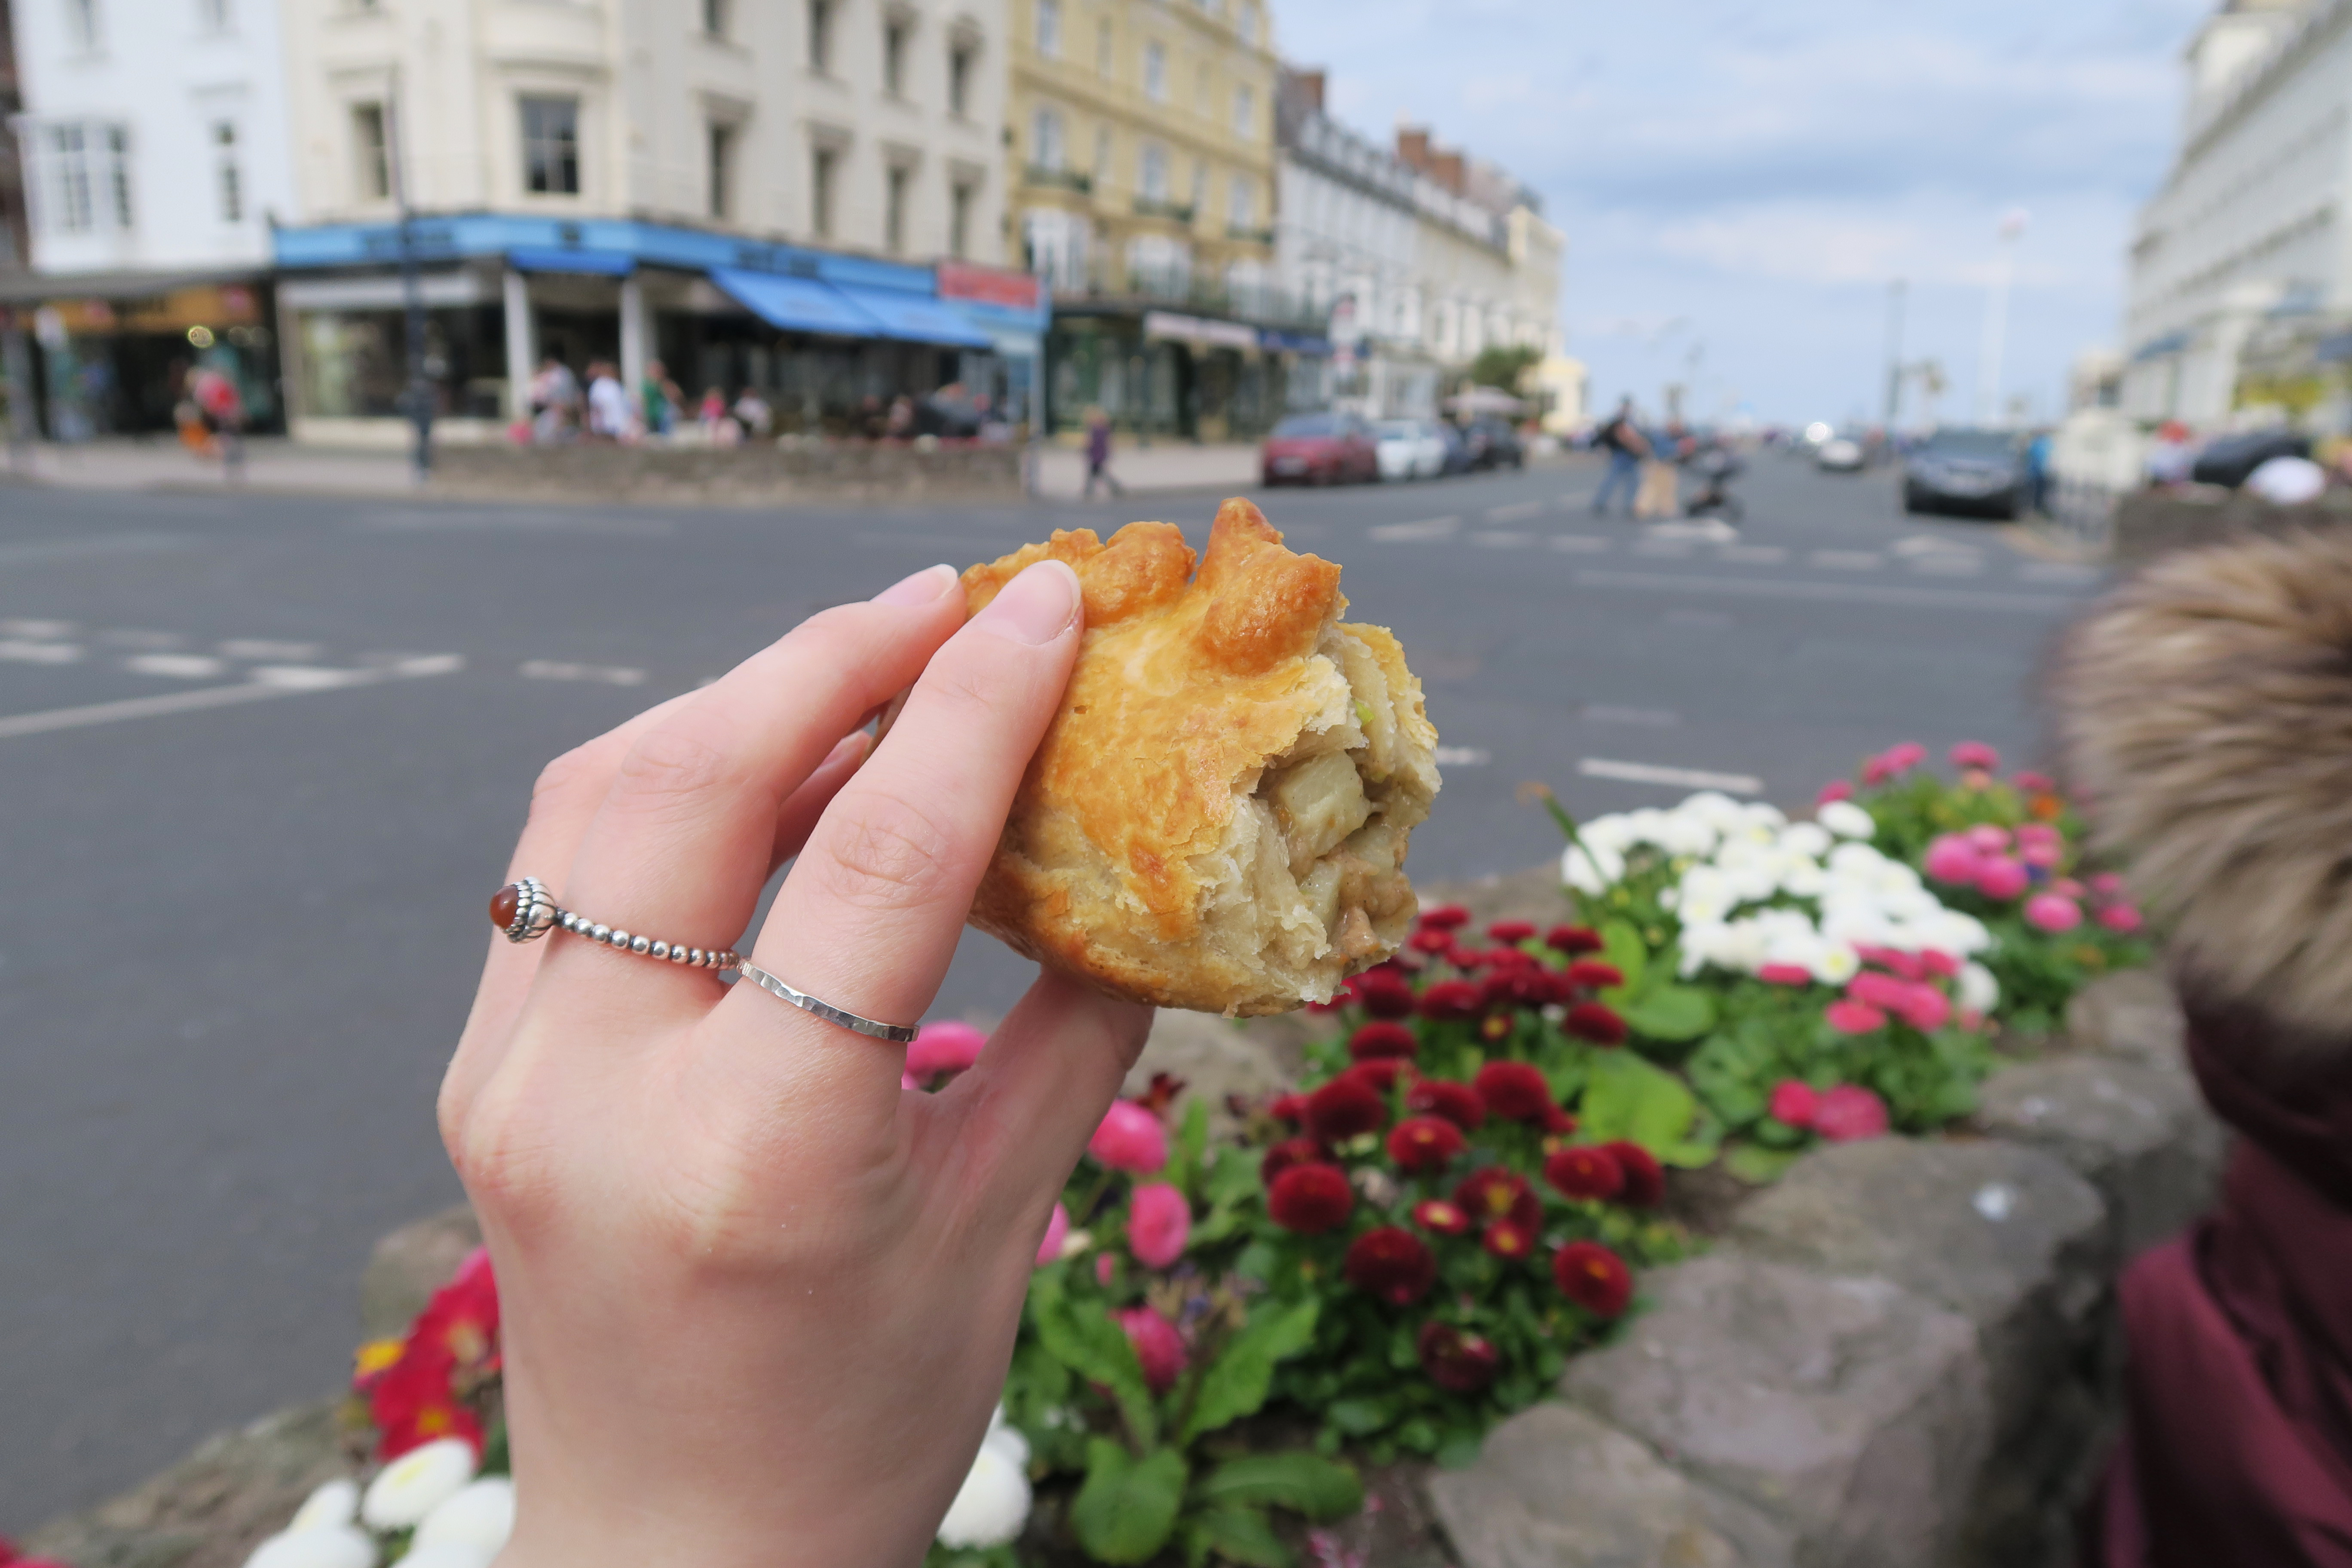 Holding a half eaten traditional Cornish pasty